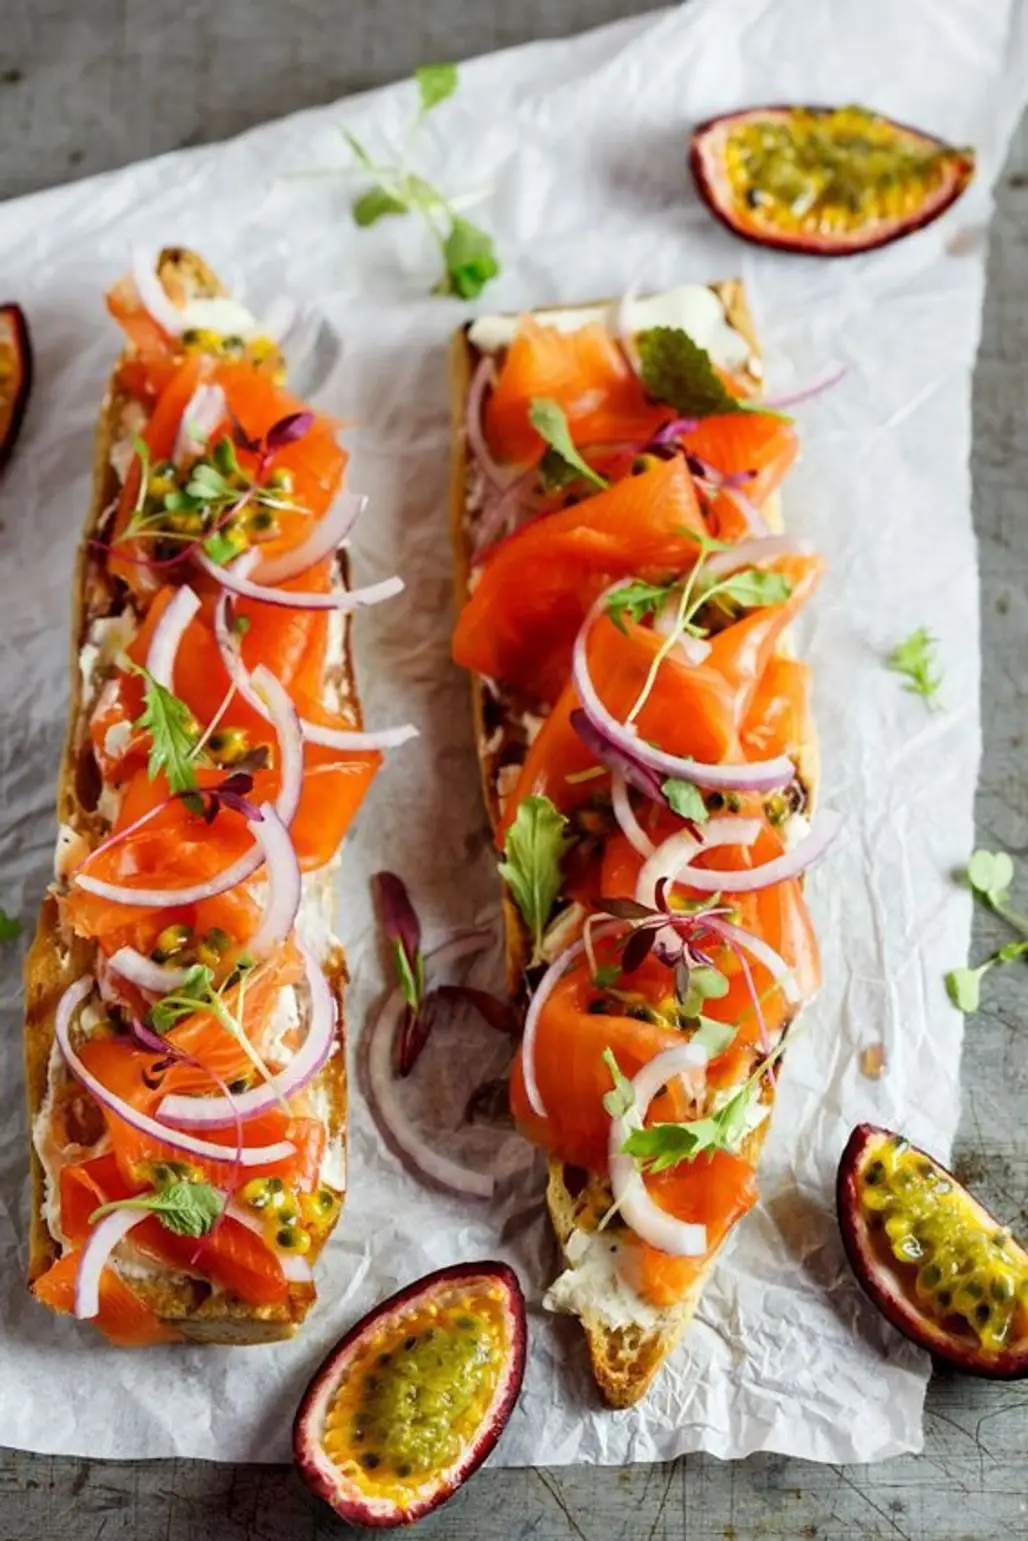 Baguette with Smoked Salmon and Passion Fruit